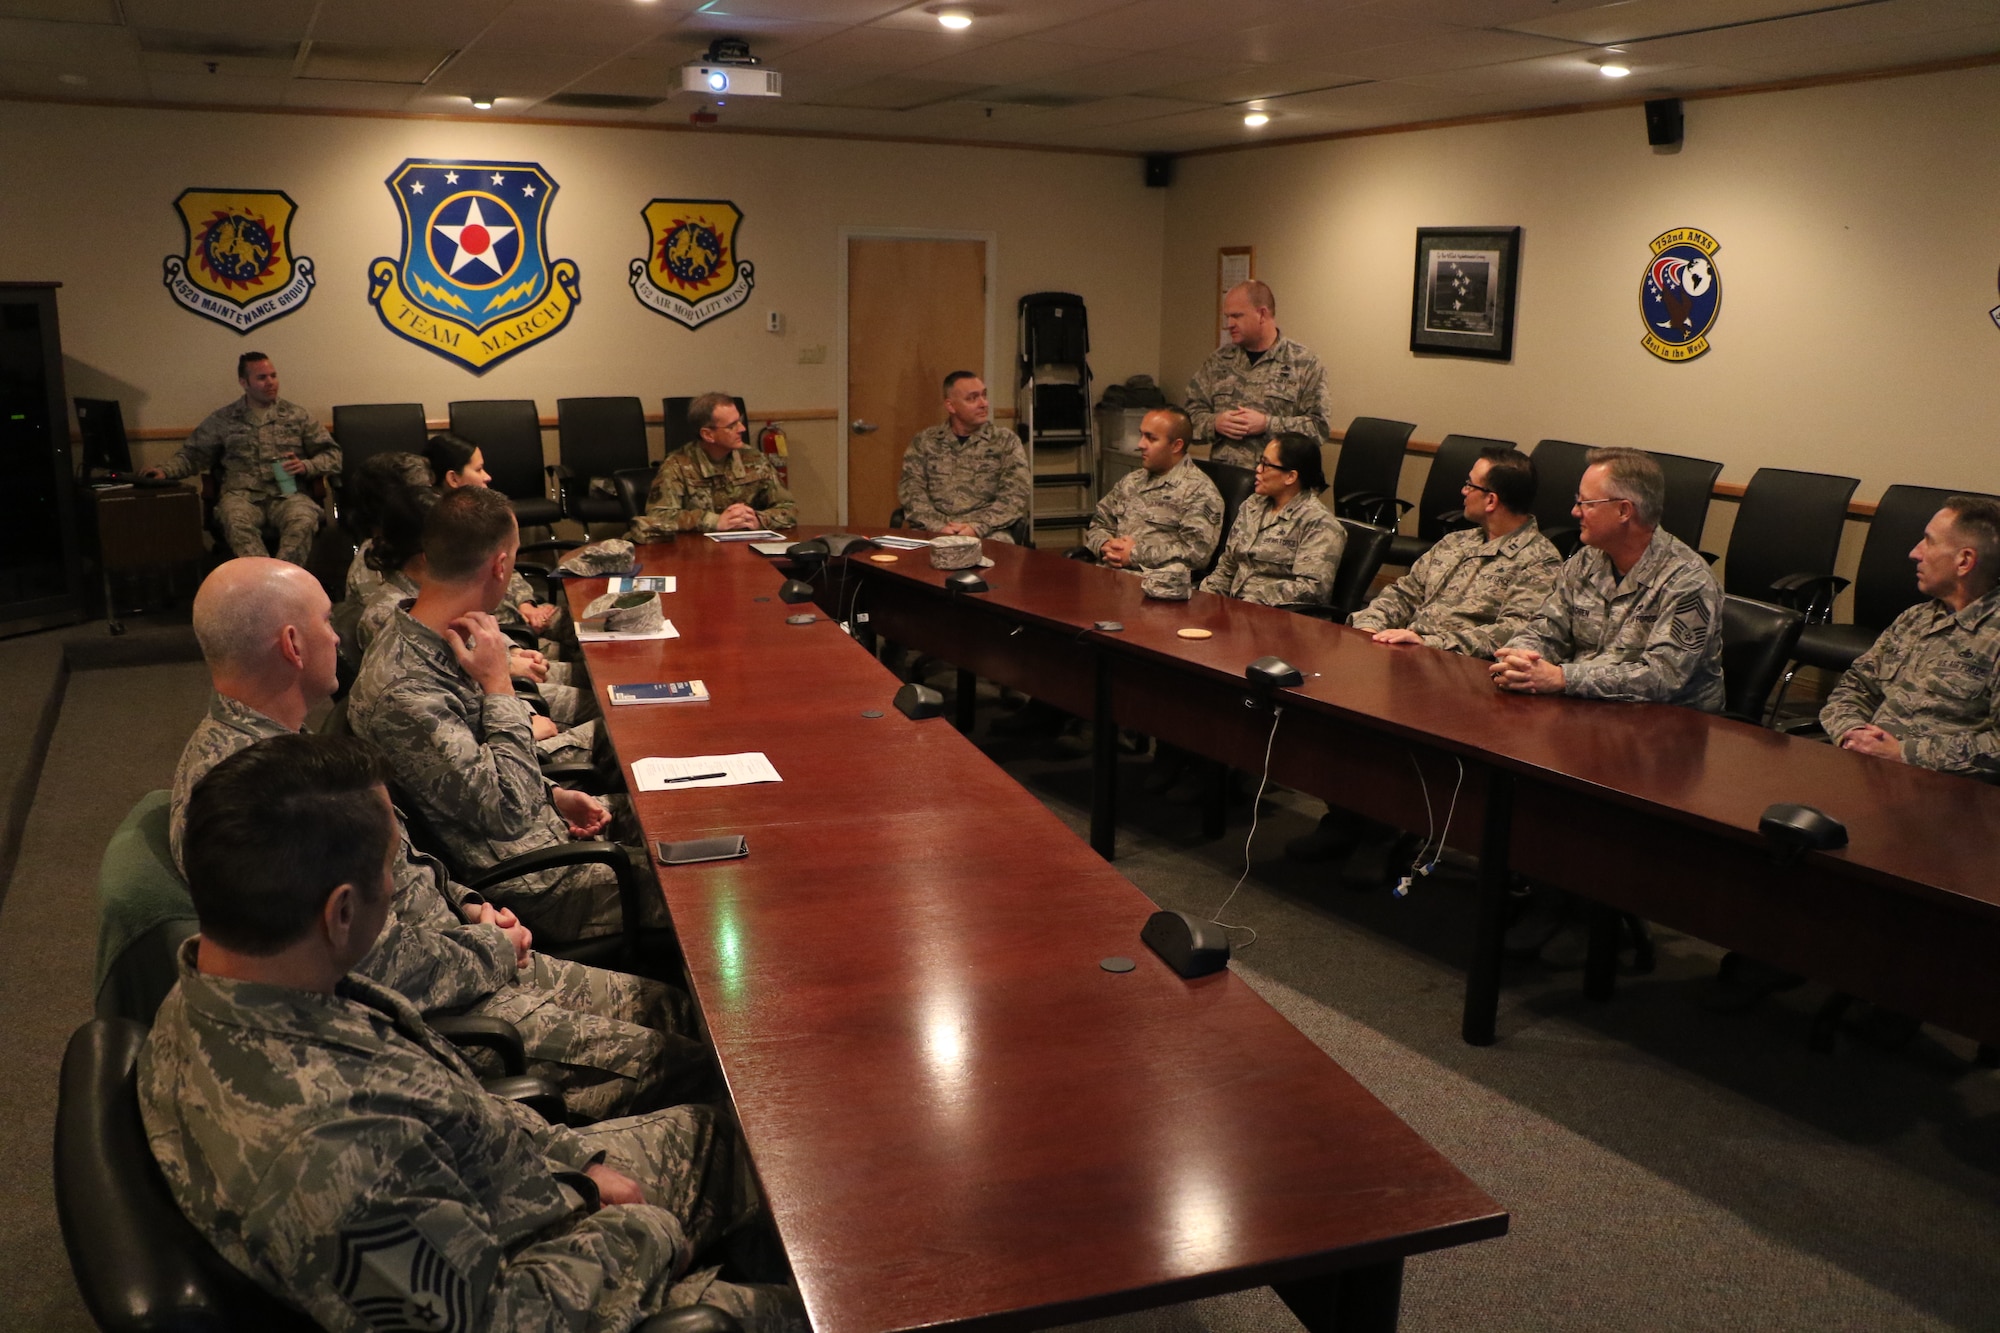 U.S. Air Force Maj. Gen. Randall Ogden (center), commander, Fourth Air Force, March Air
Reserve Base, listens to a mission briefing here by U.S. Air Force Col. Aaron Heick (right
standing), commander, 452nd Maintenance Group, March ARB, Feb 10, 2019. 4AF senior
leadership toured March ARB to learn about the 452nd AMW’s mission, capabilities and
challenges as part of a multi-day unit visit.